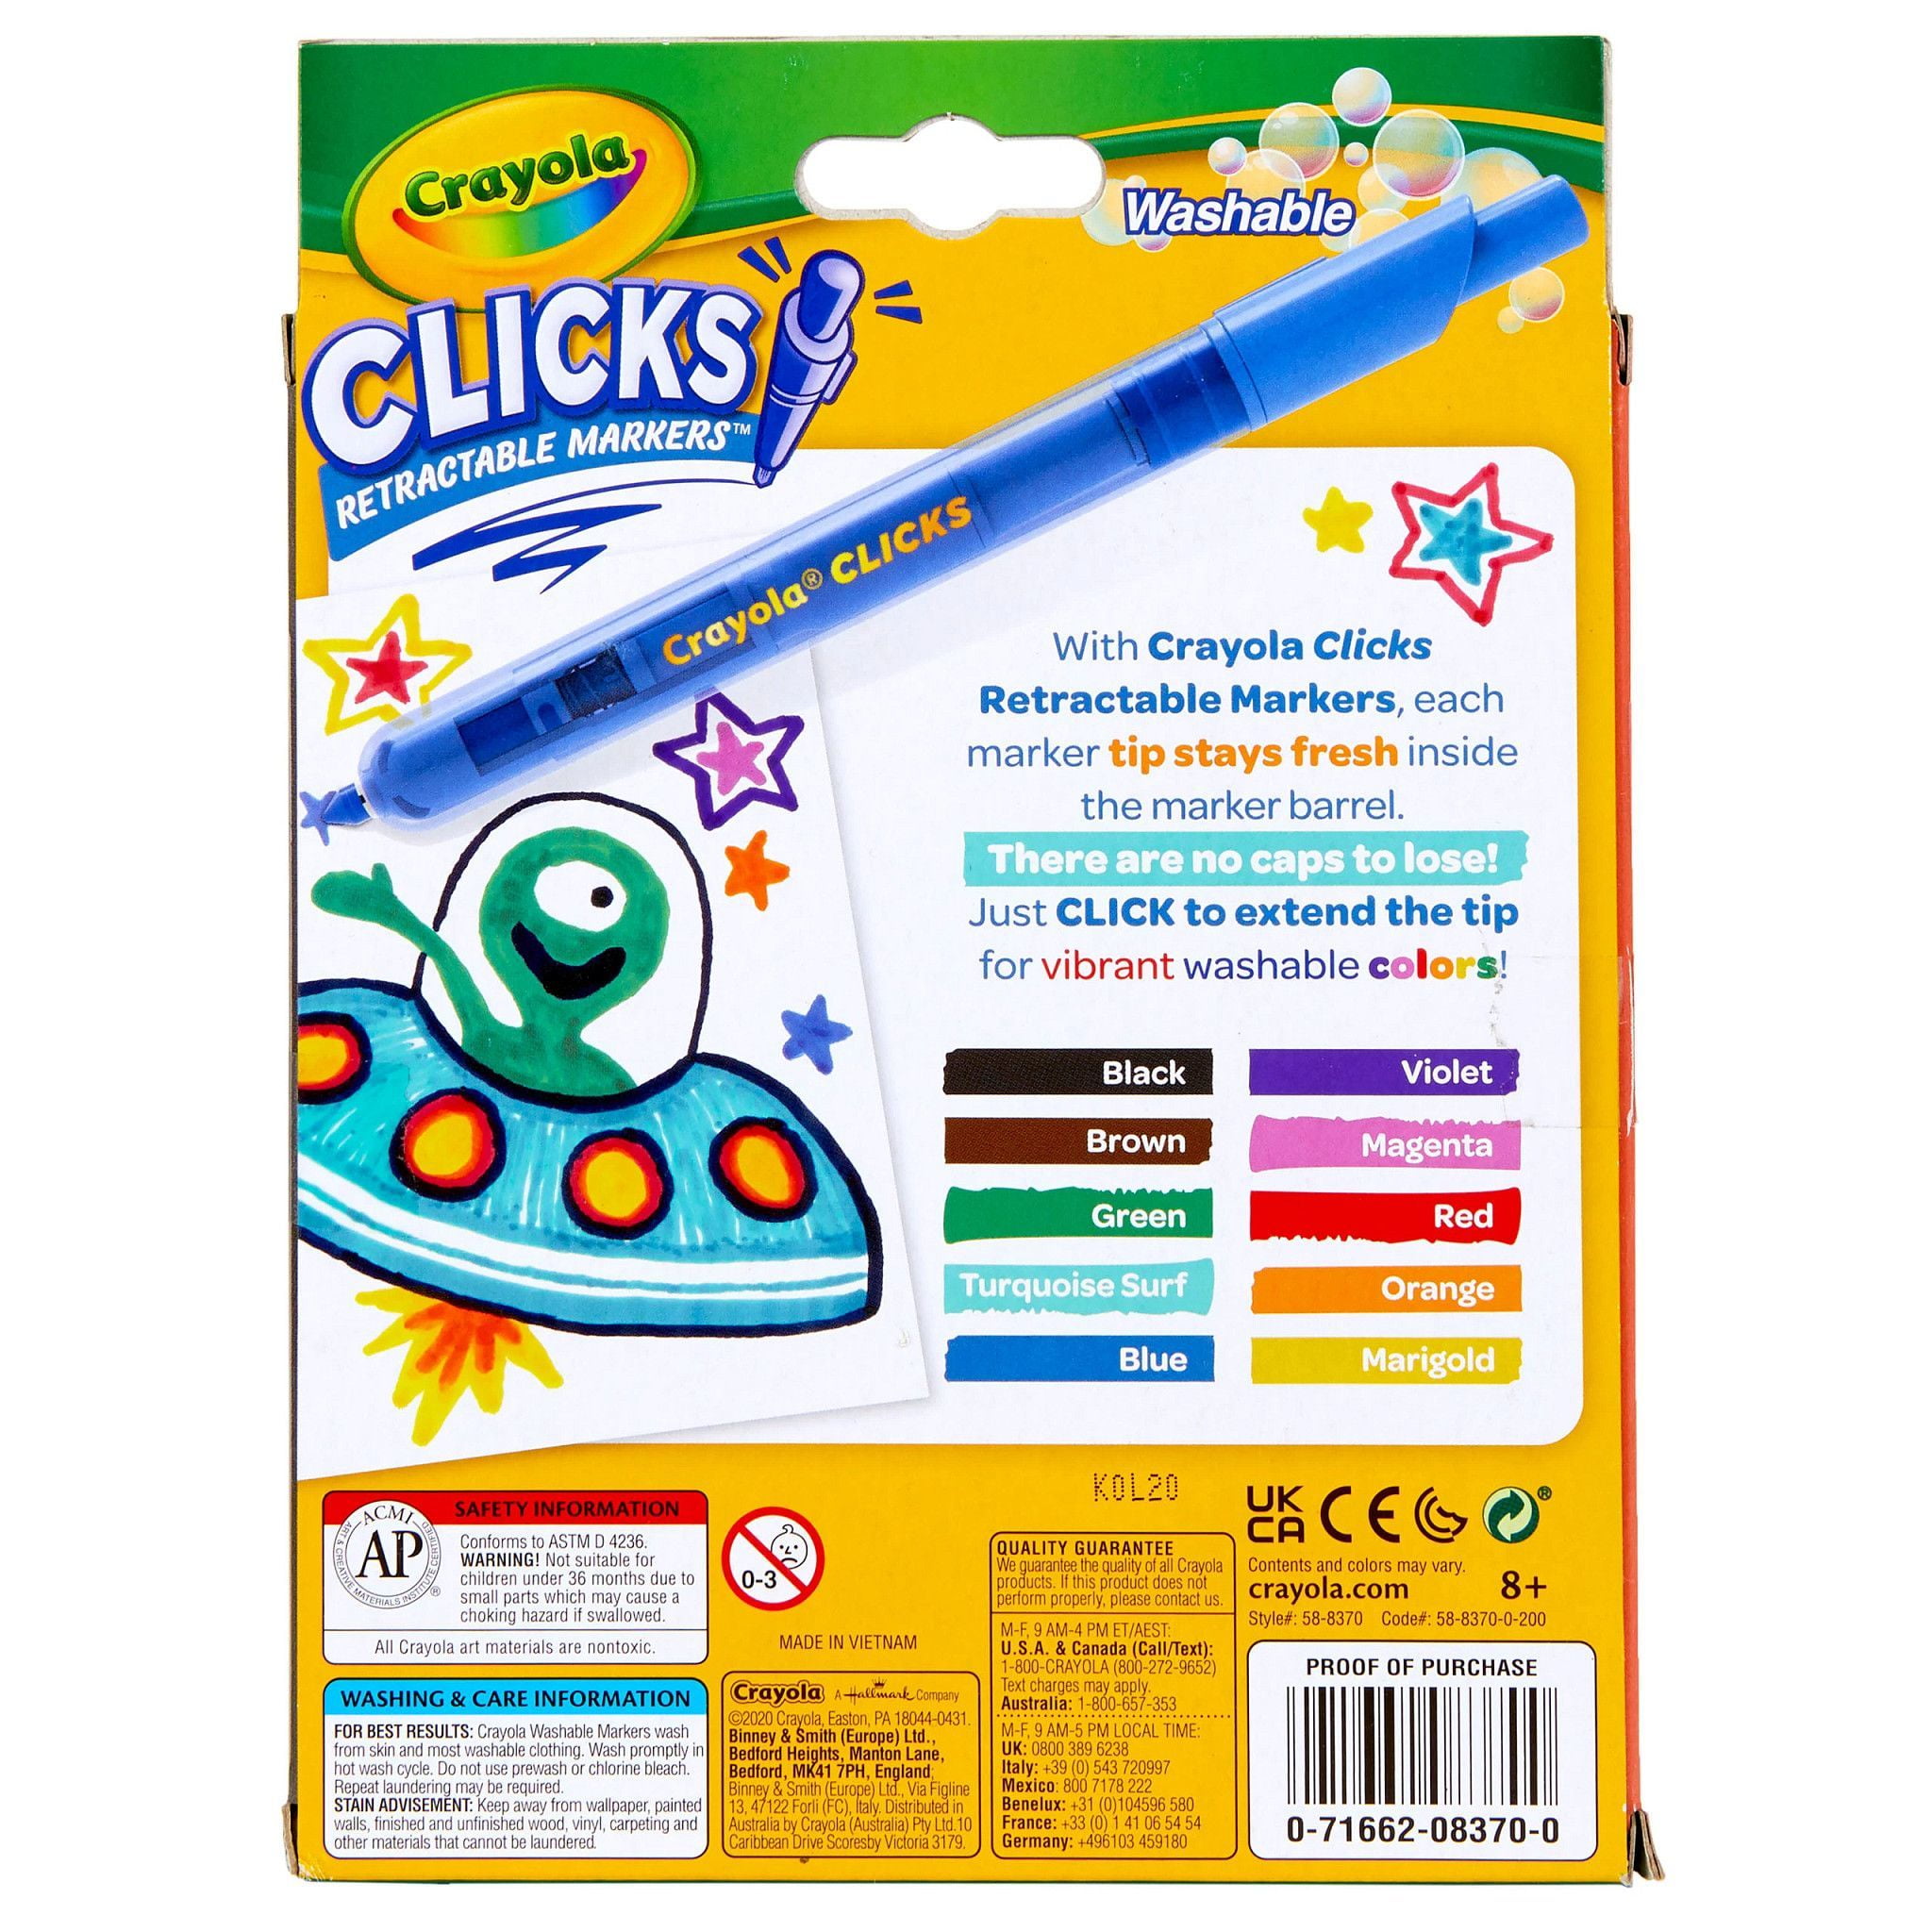 Crayola Marker Class Thin 10 (Pack of 12), SnackMagic